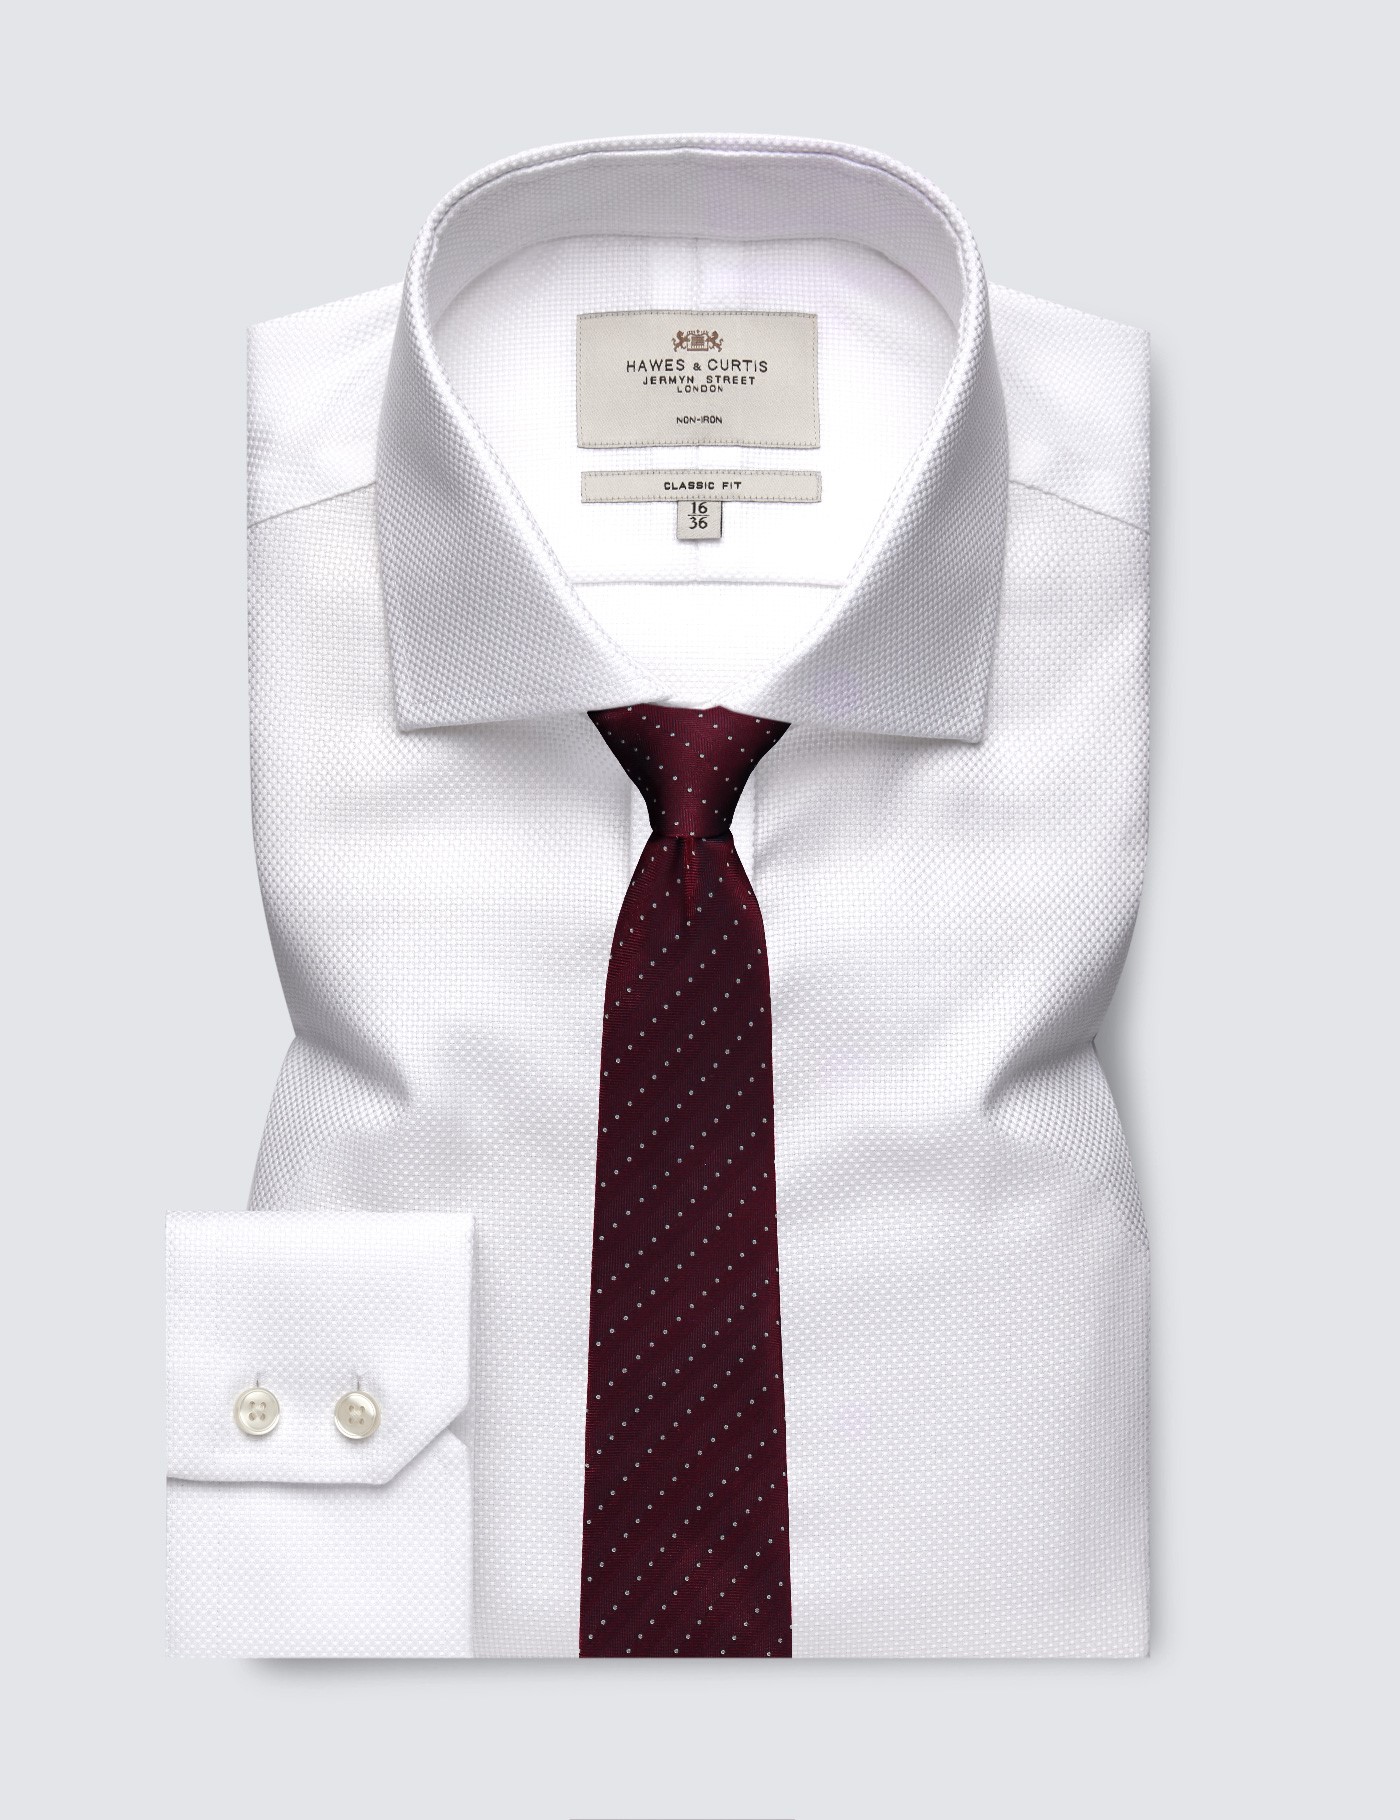 hawes & curtis non-iron white fabric interest classic fit shirt - single cuff - windsor collar